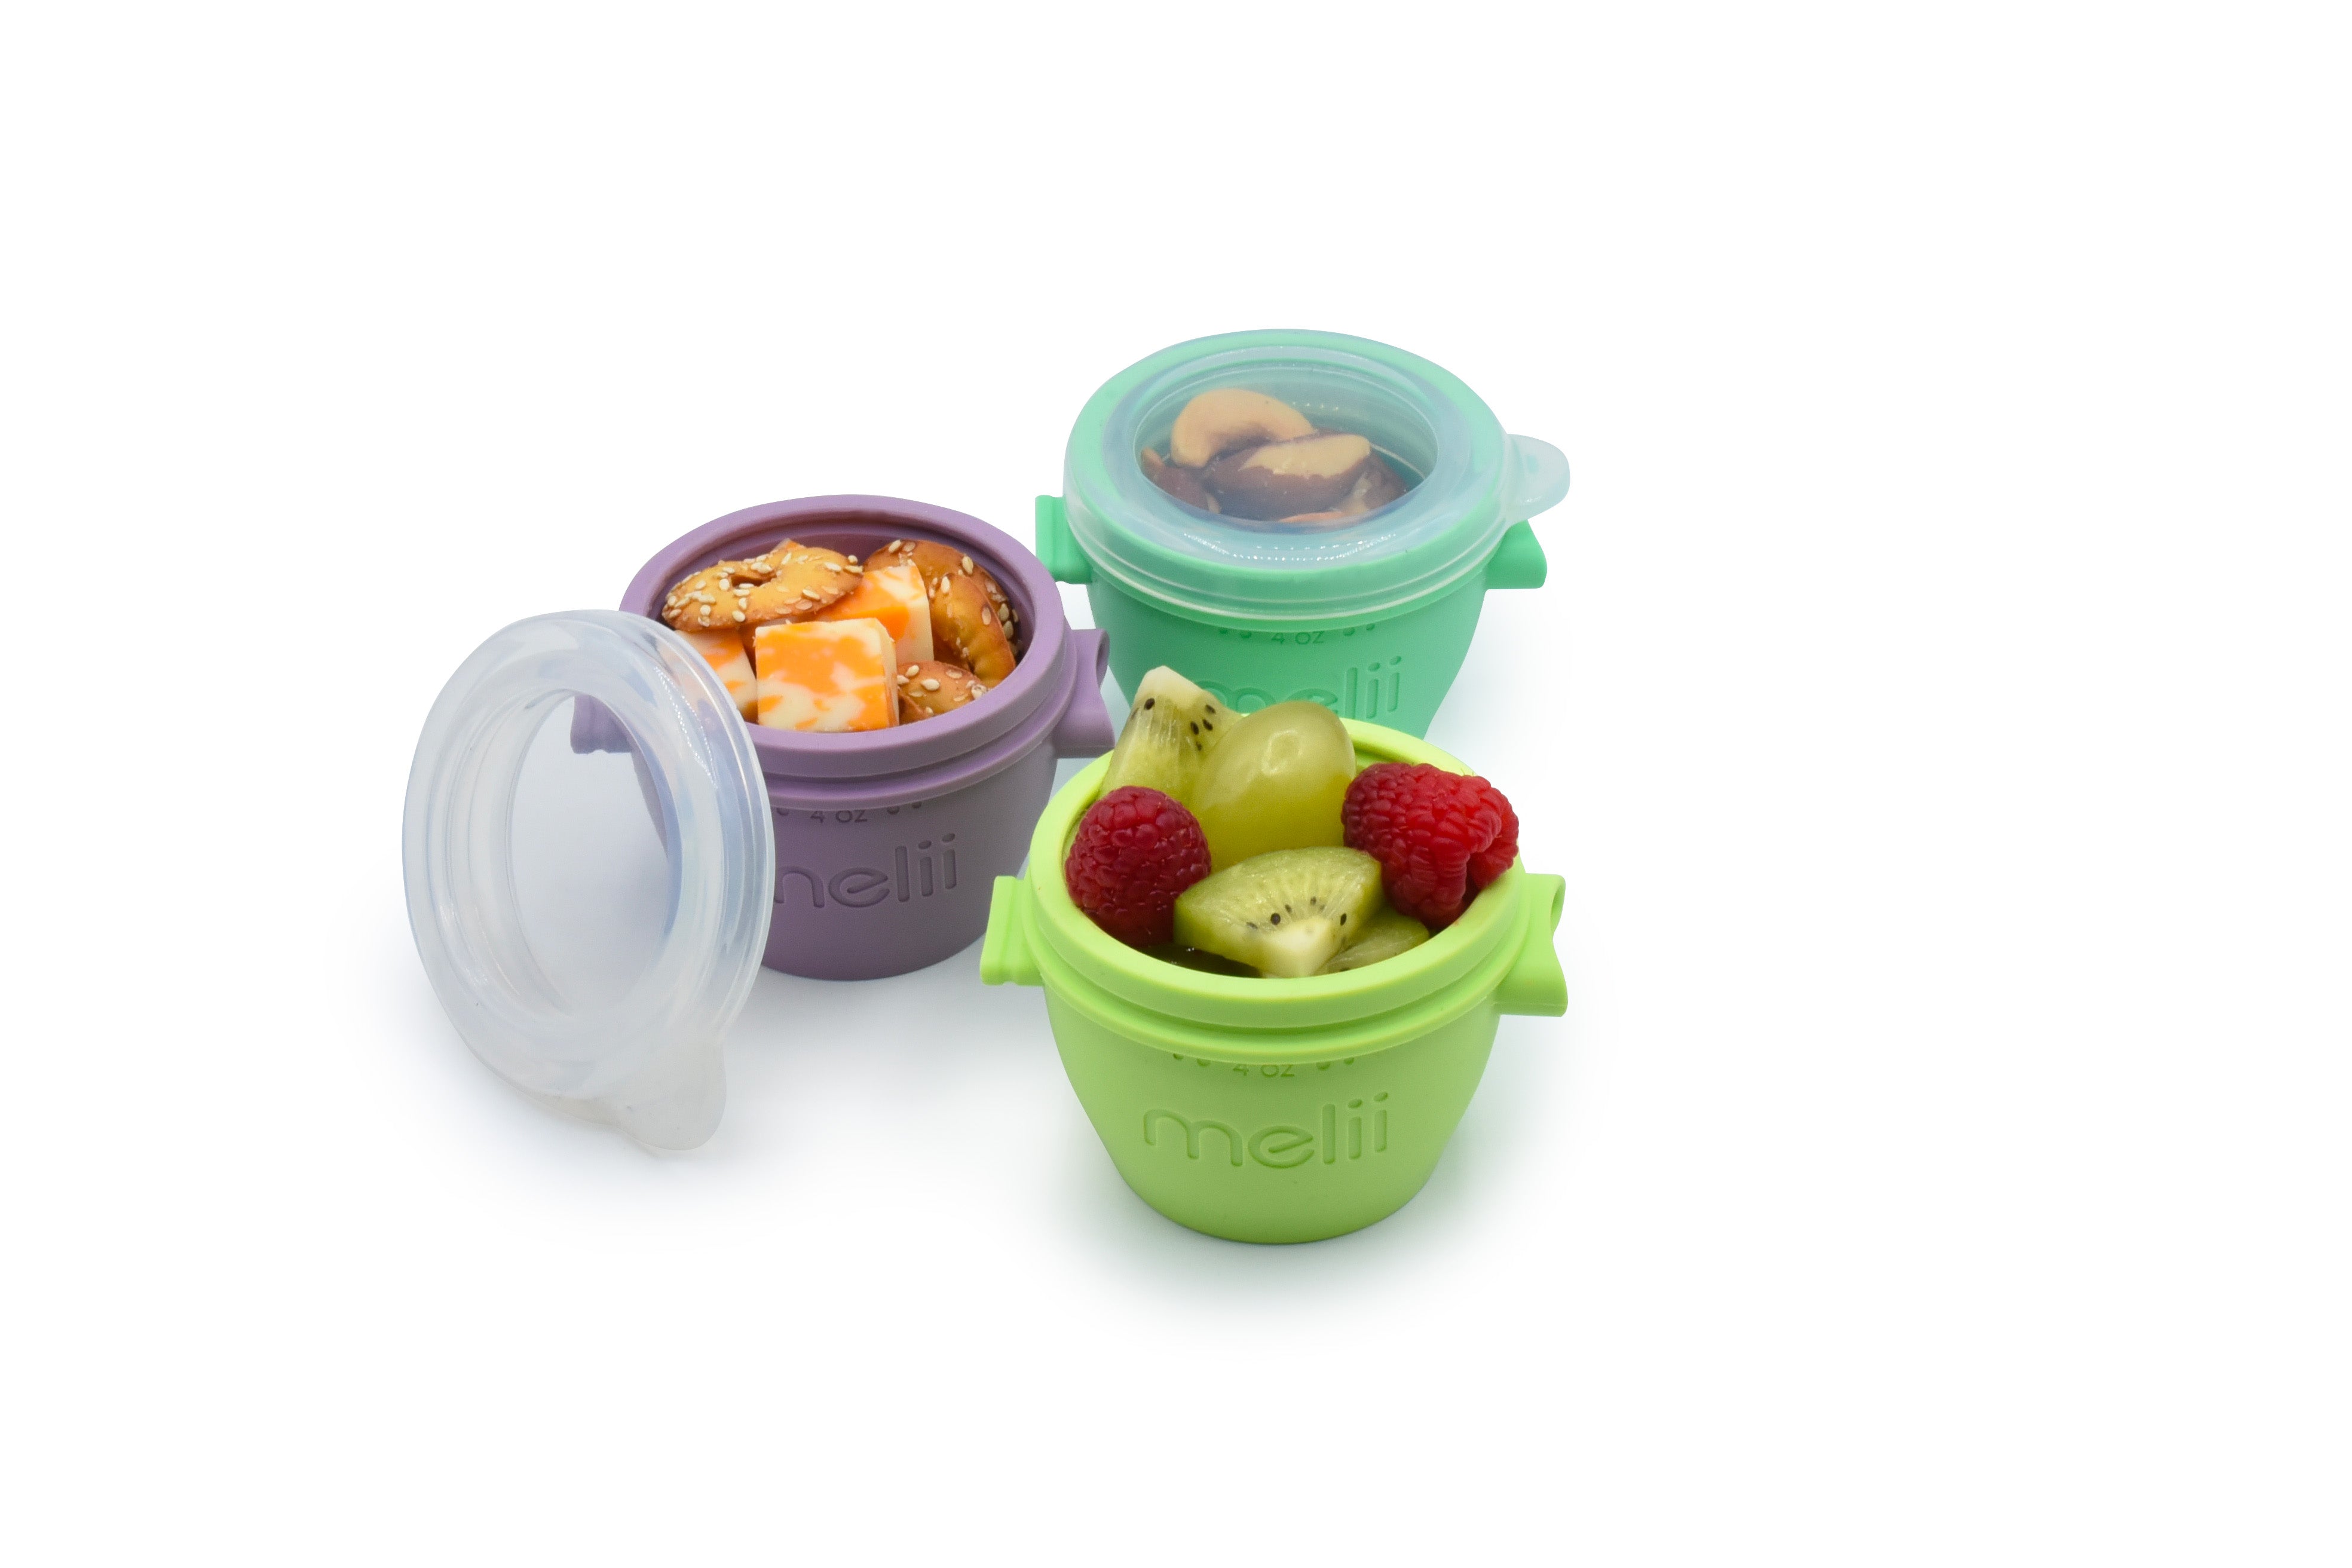 Silicone Baby Food Freezer Tray with Lid – Meliibaby